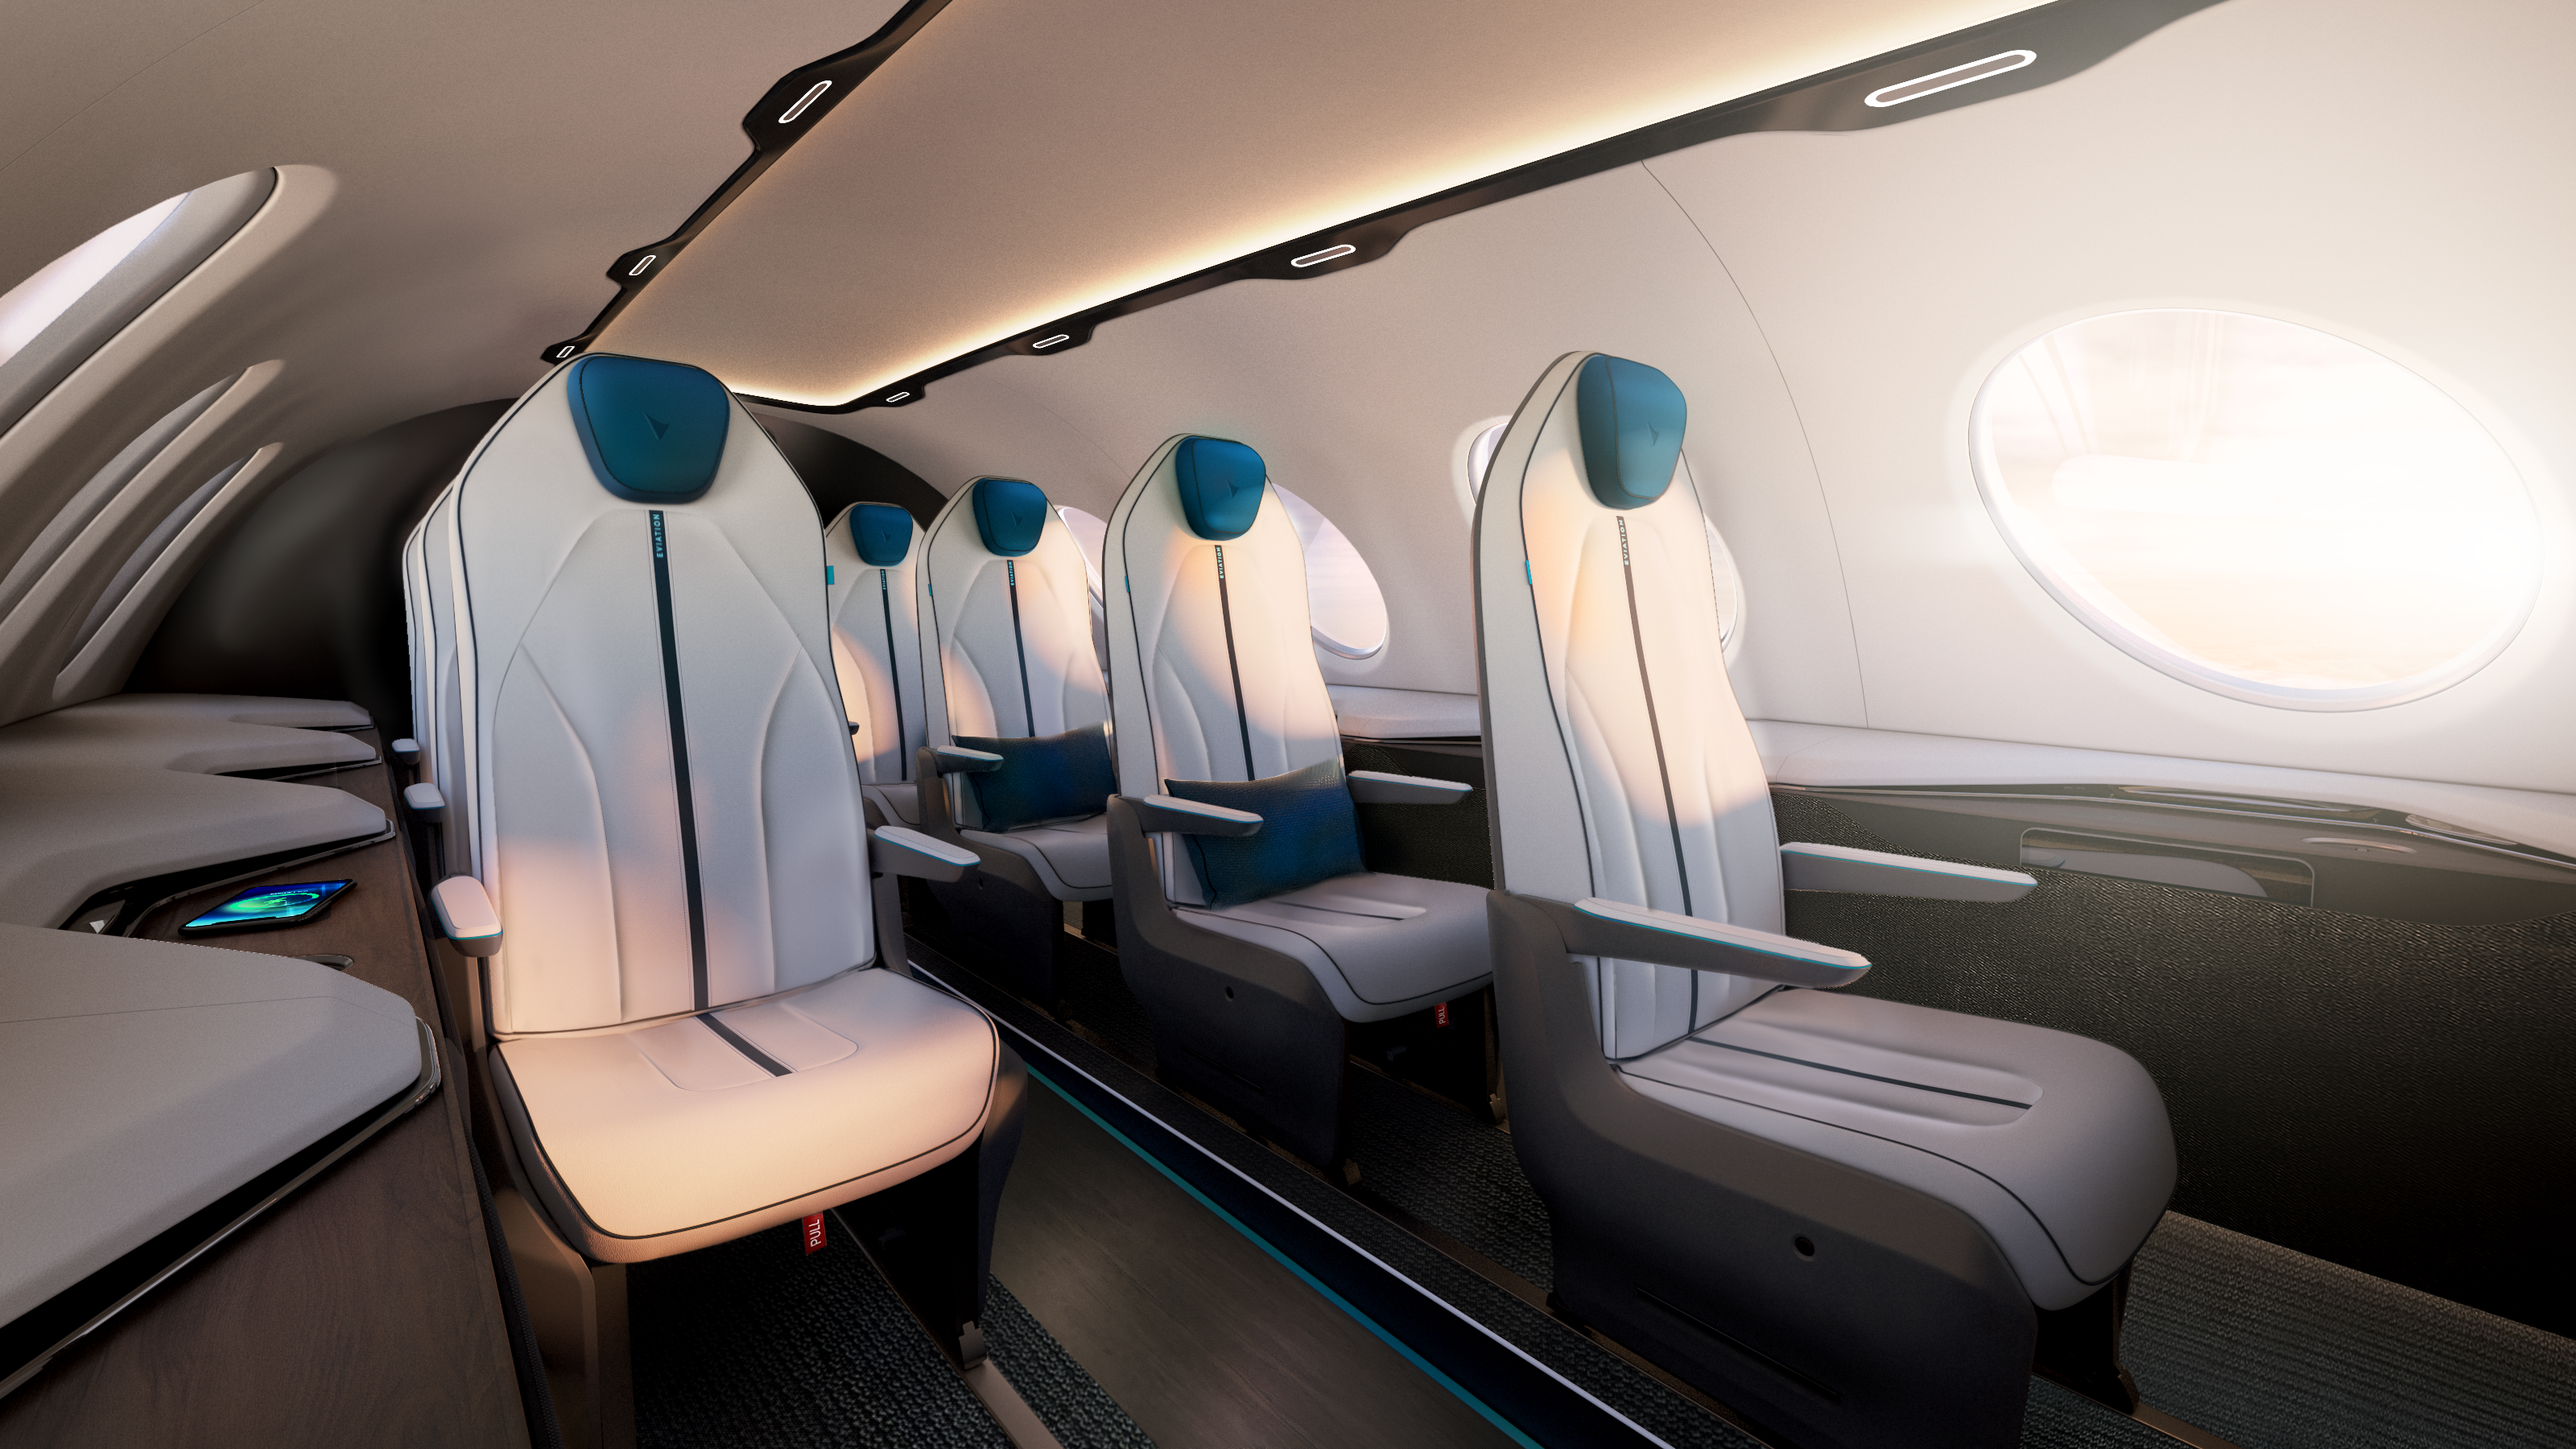 A rendering of the interior of Eviation's electric plane, named Alice